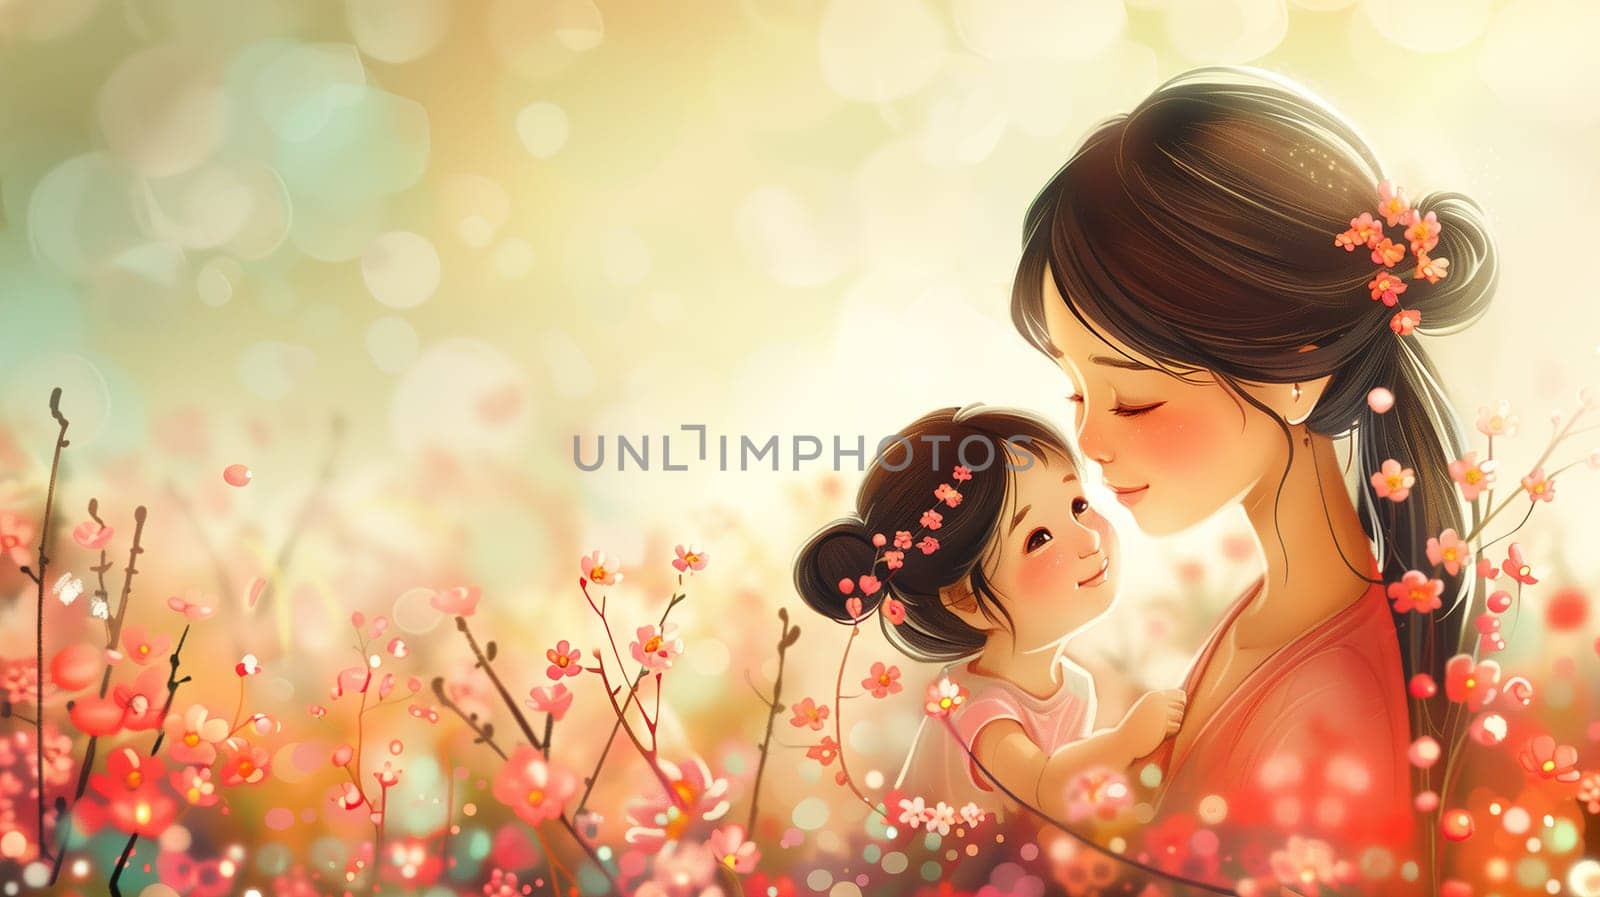 A painted depiction of a mother and child standing amidst a vibrant field of colorful flowers. The mother holds the child tenderly, both appearing content and connected in the natural setting.